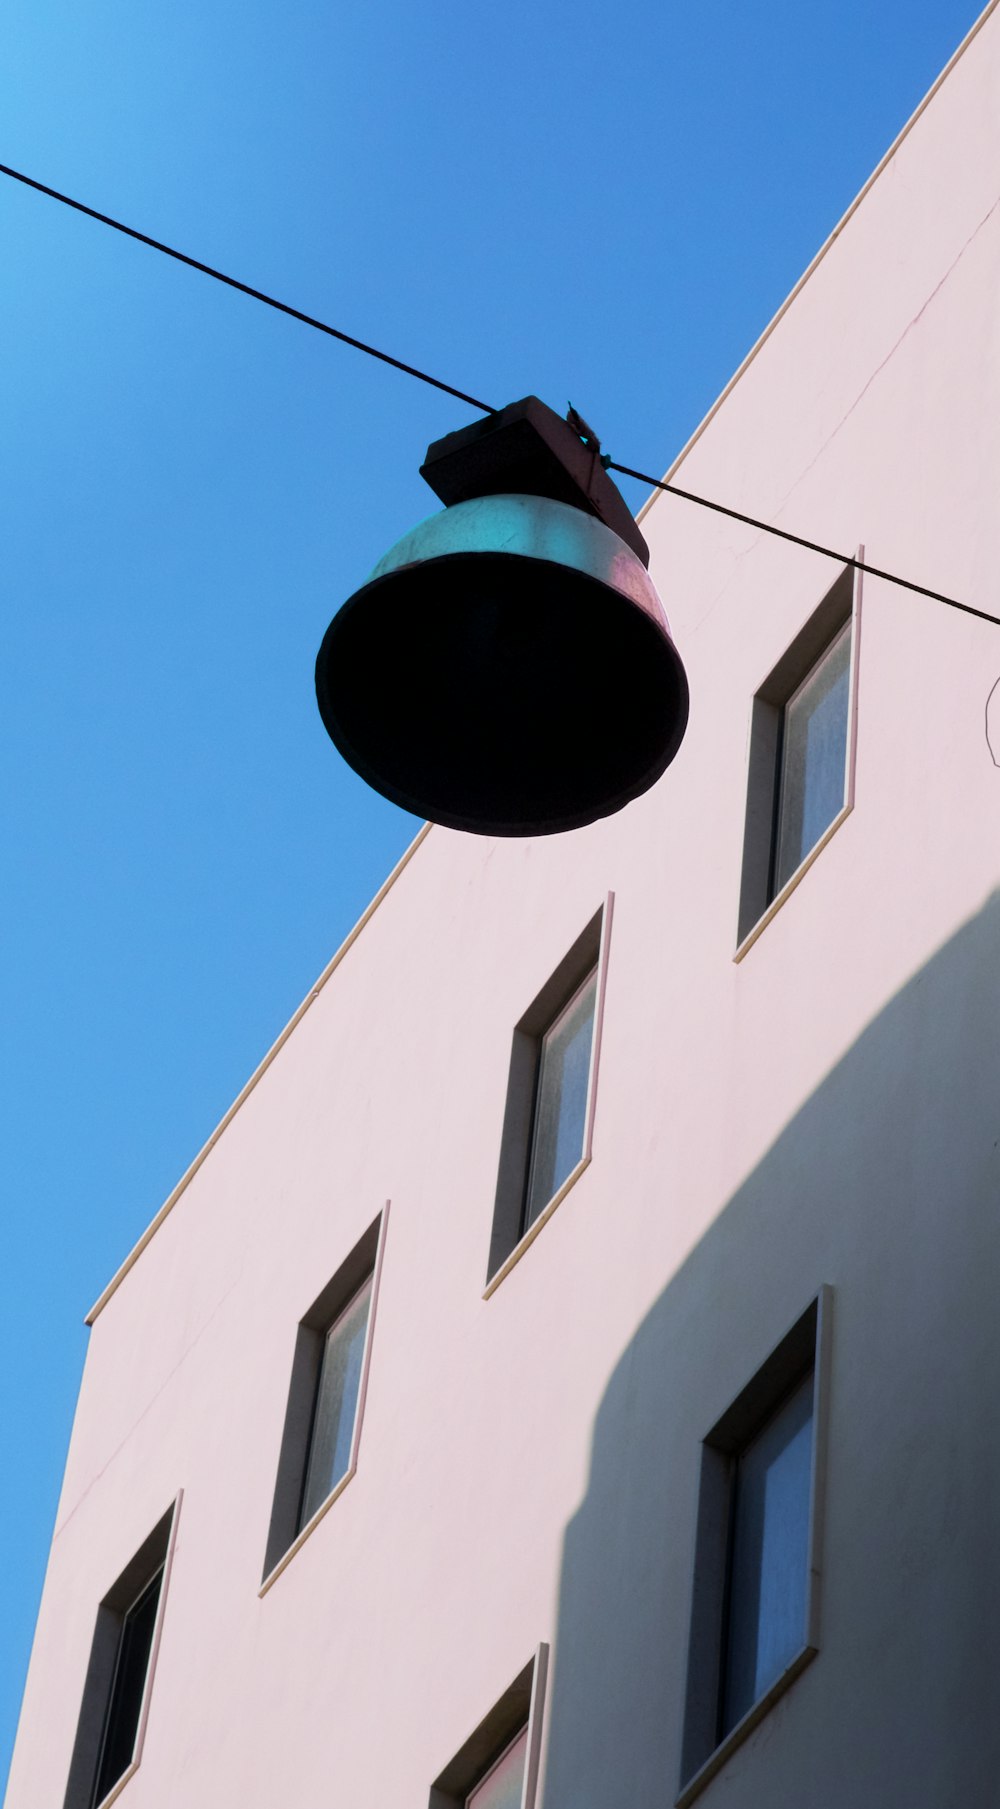 a street light hanging from a wire next to a building